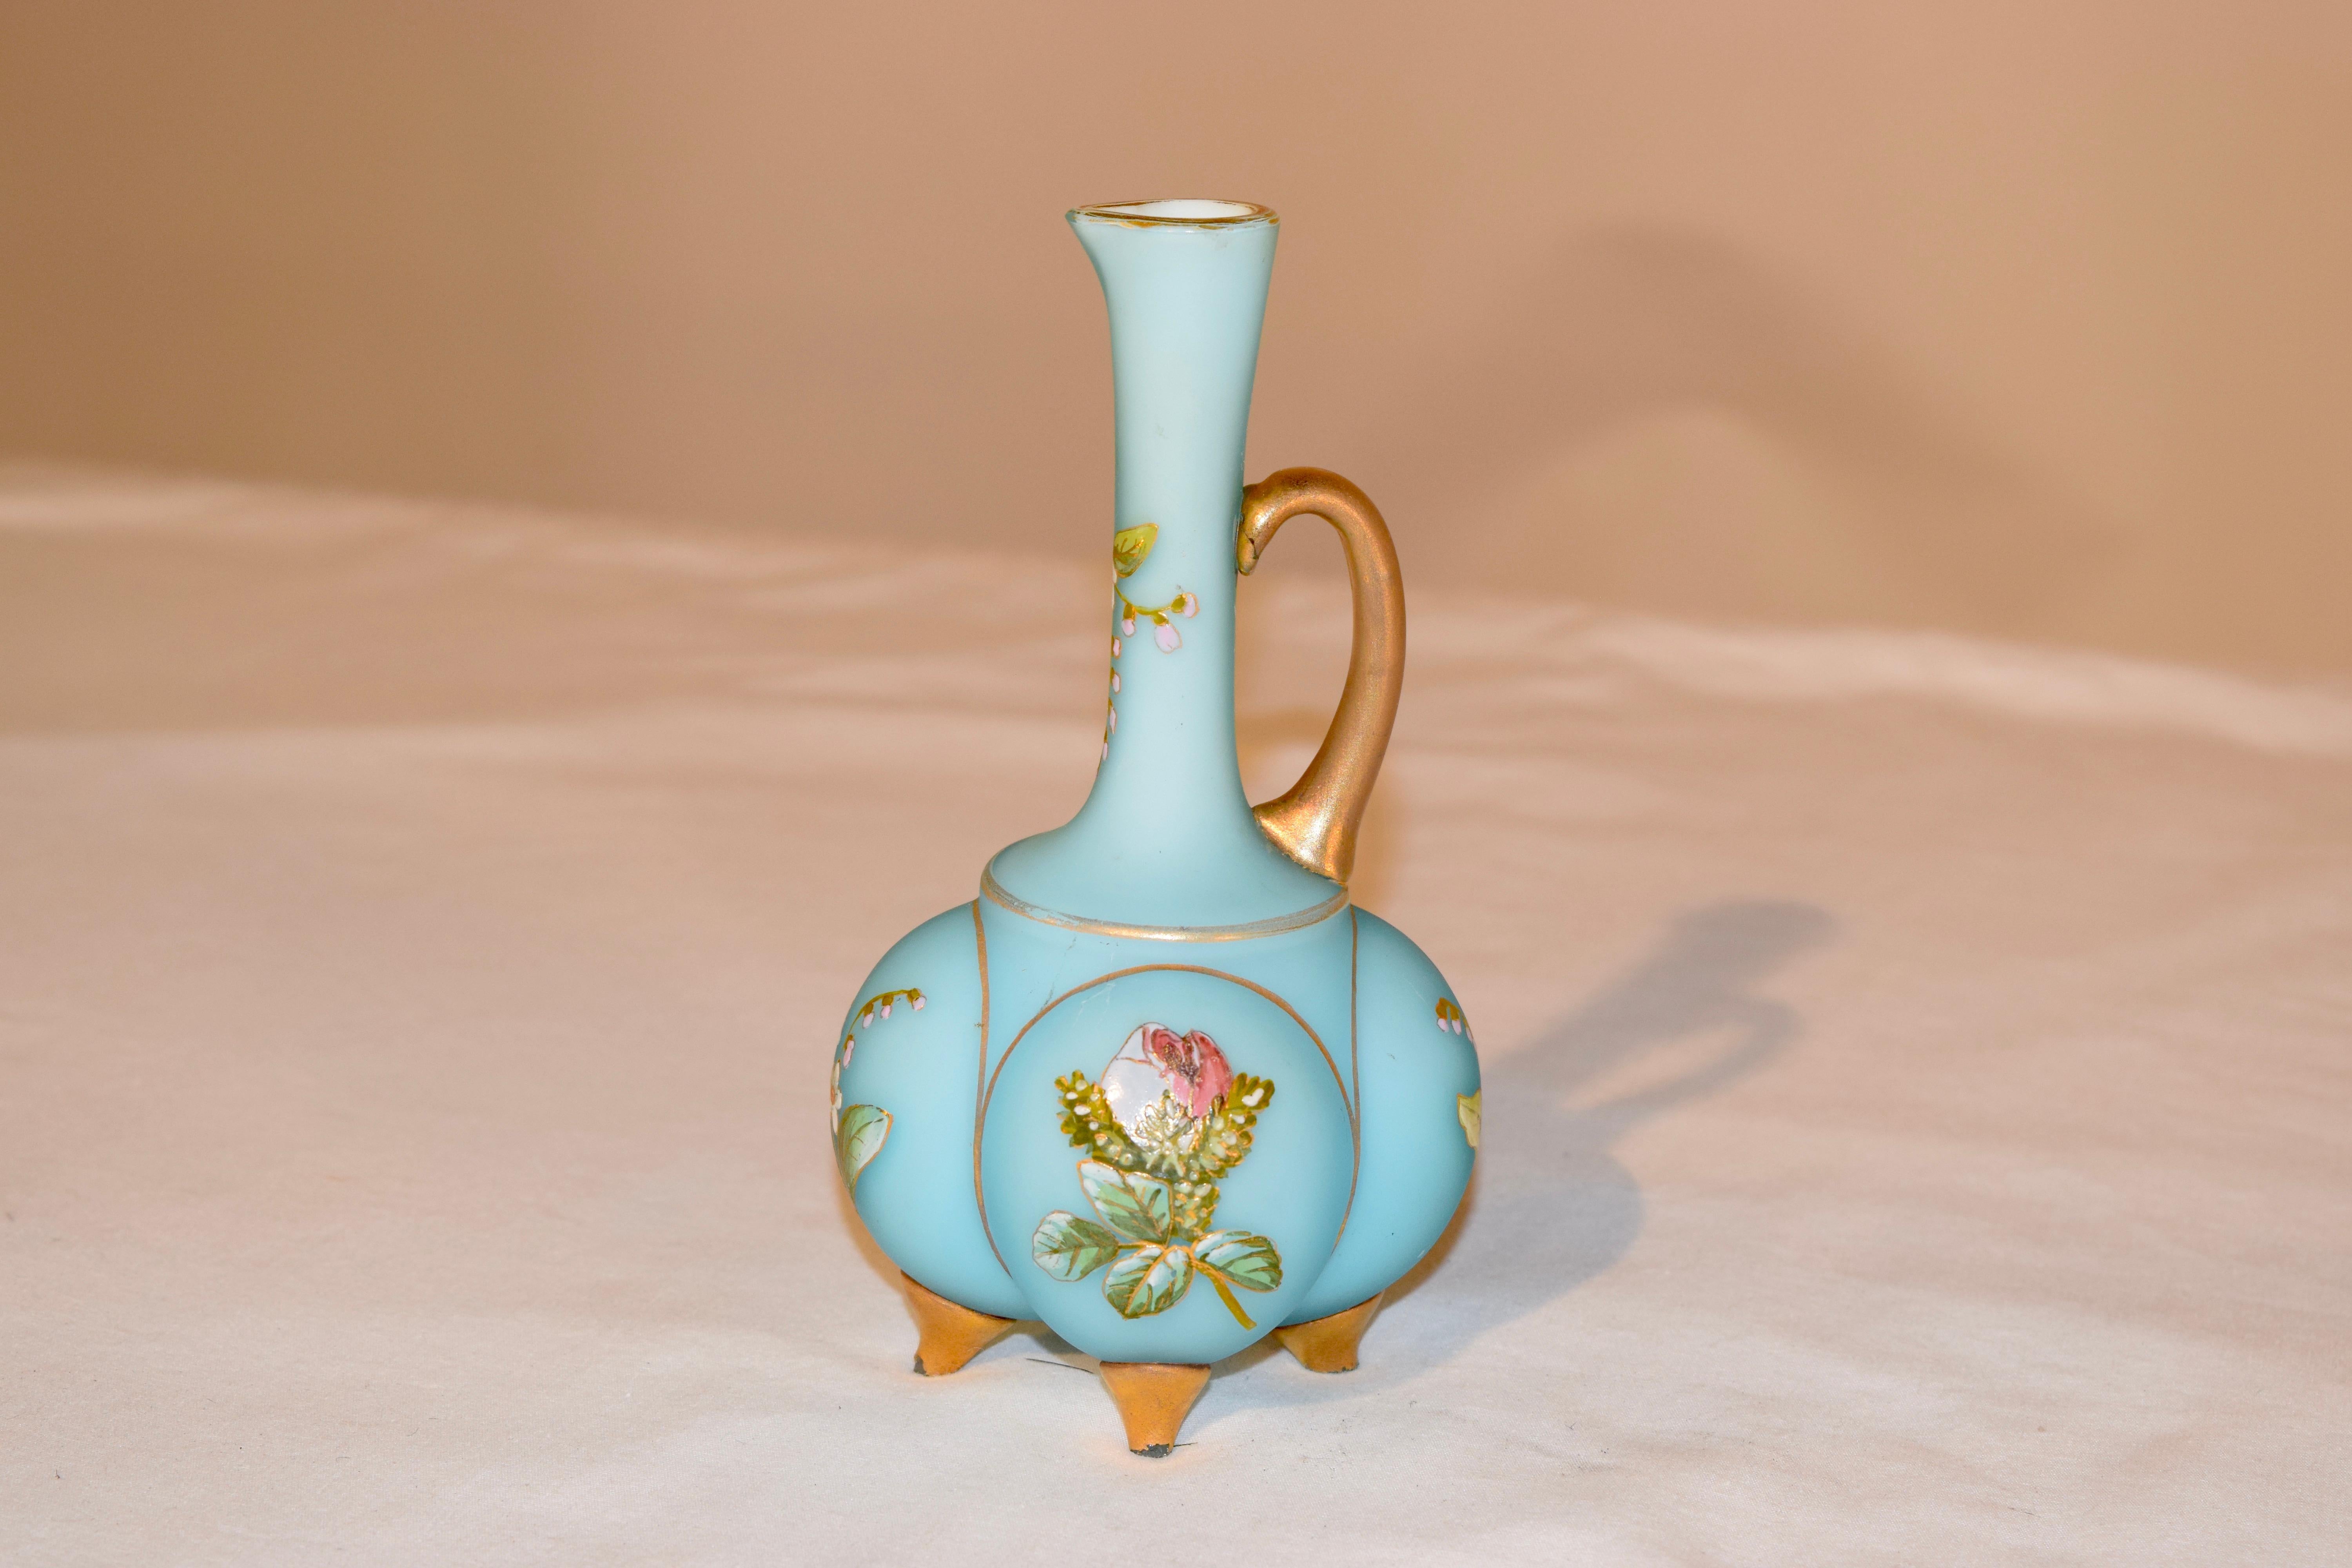 19th century satin glass cruet in a lovely blown form with applied glass handle and feet painted in gold. There are hand painted flowers on all sides.